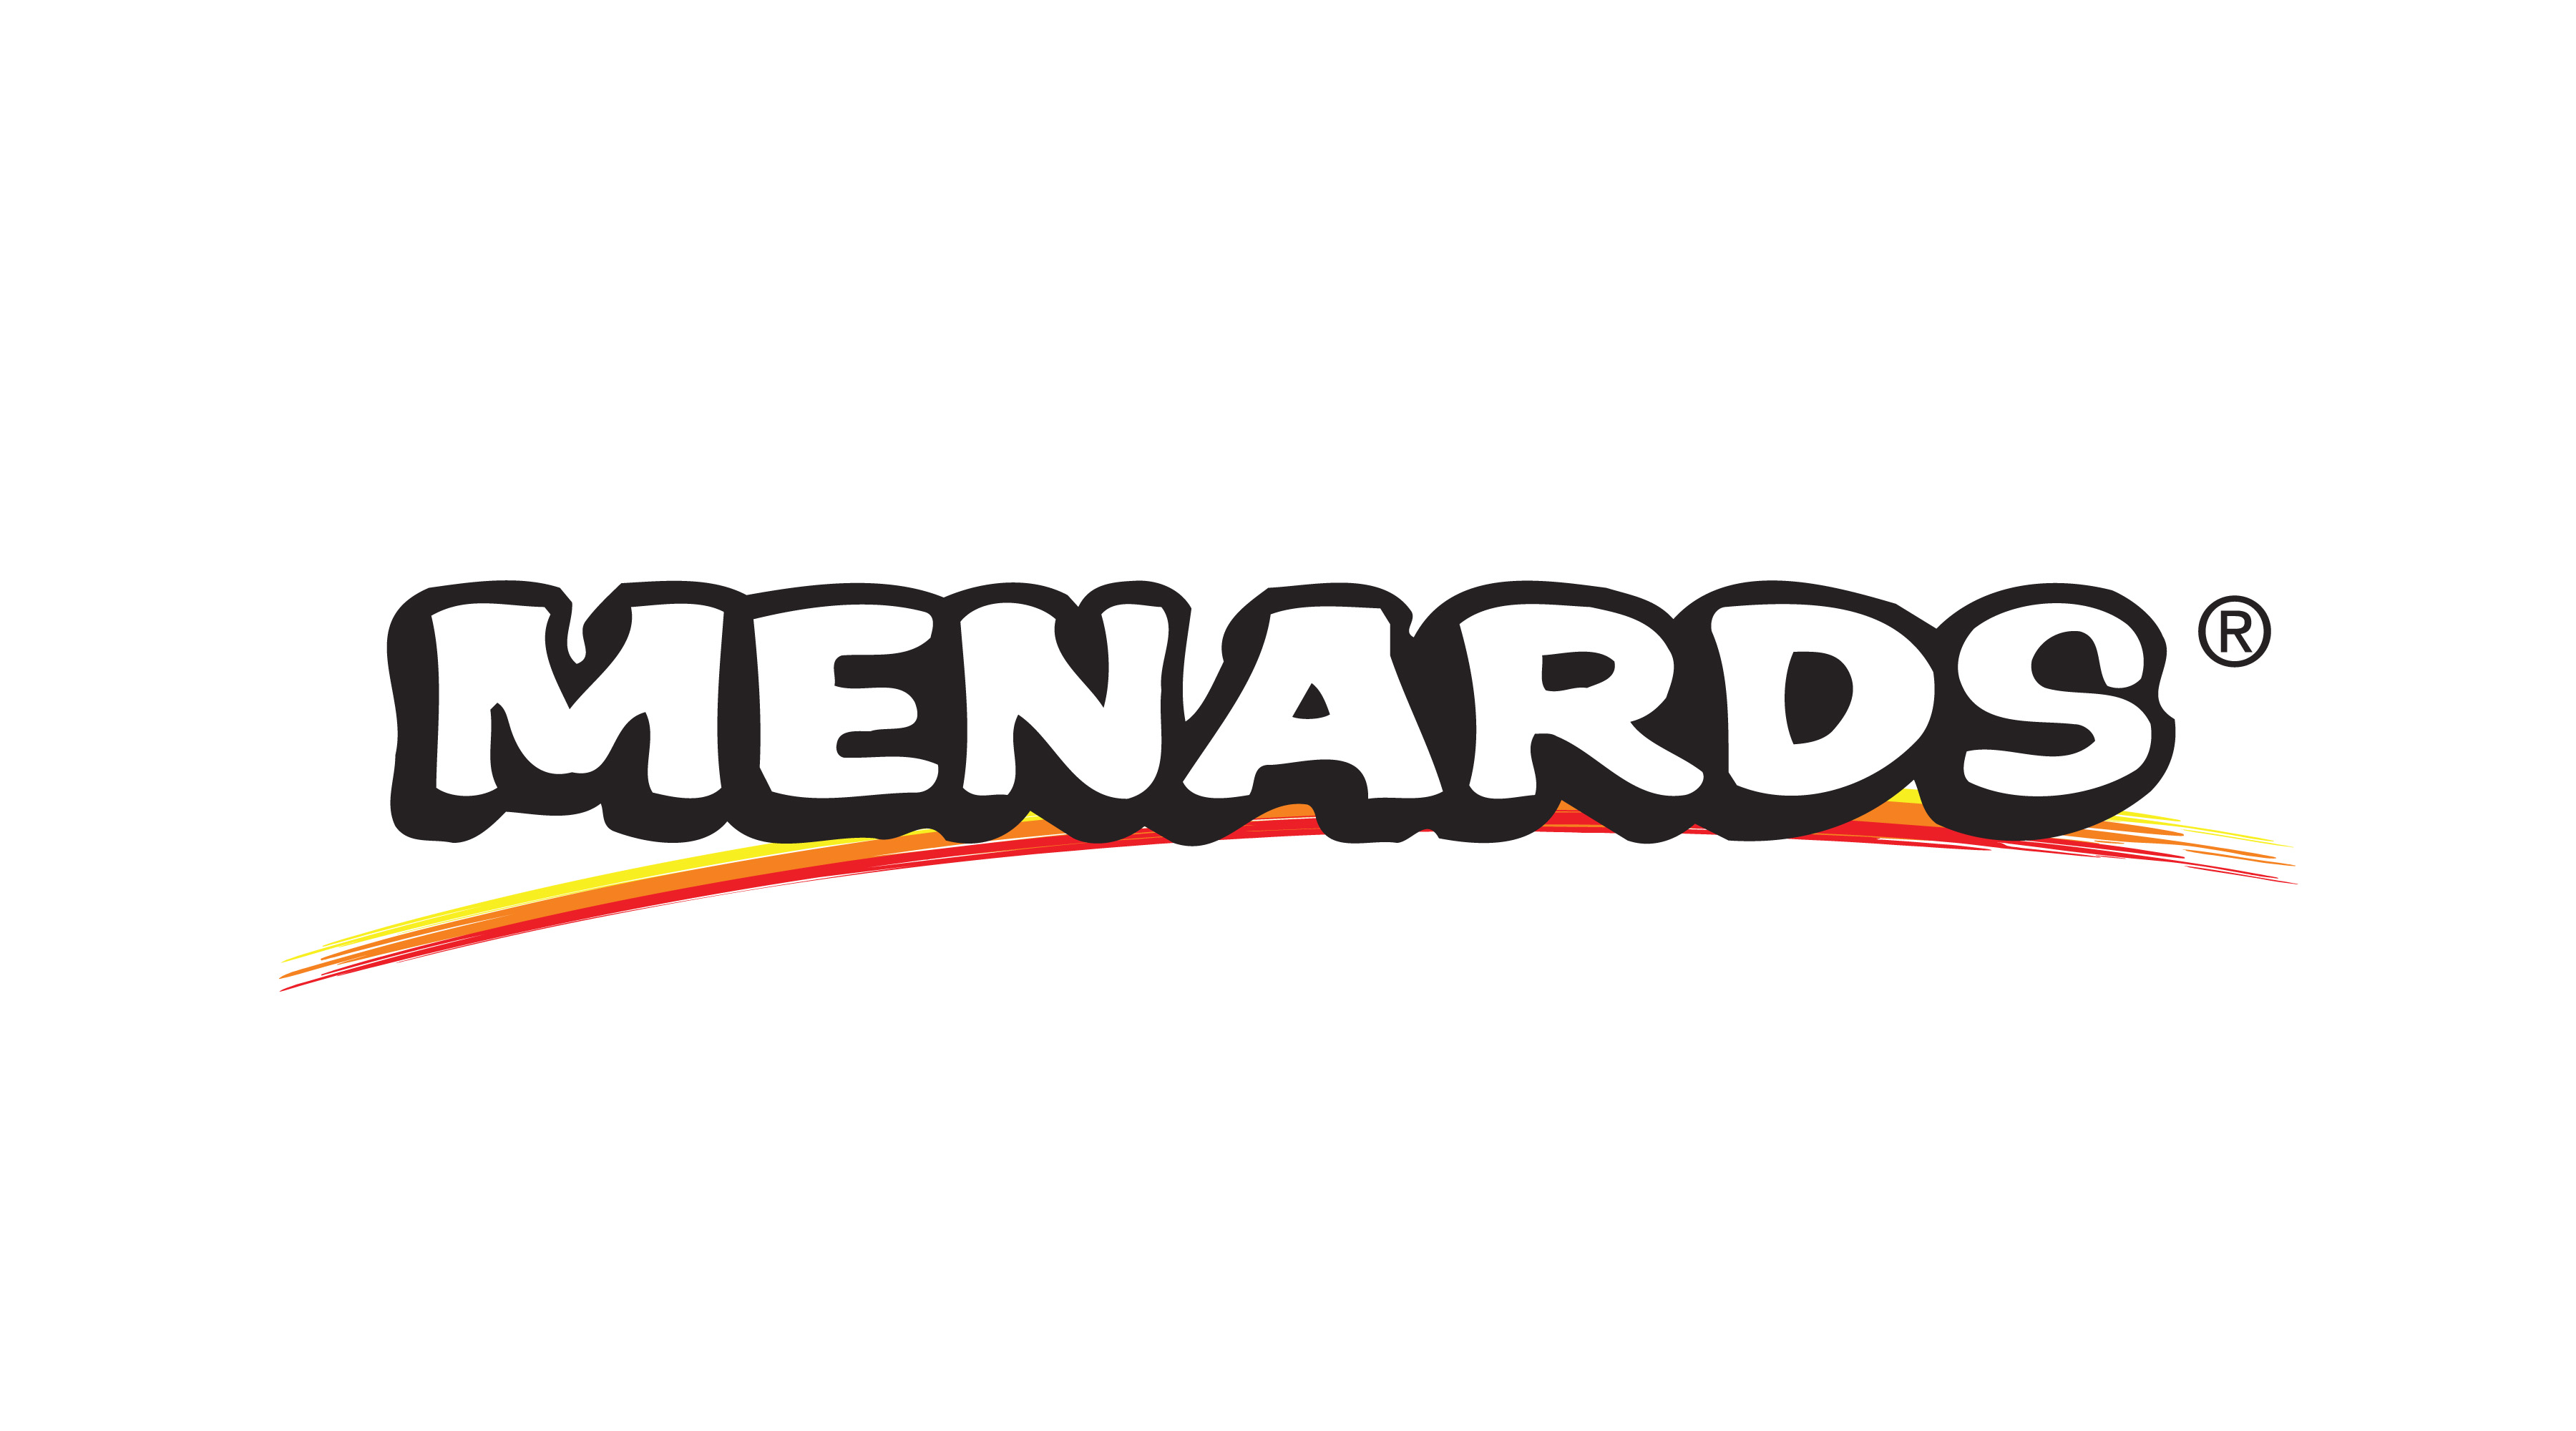 learn-all-about-the-secret-menards-rebate